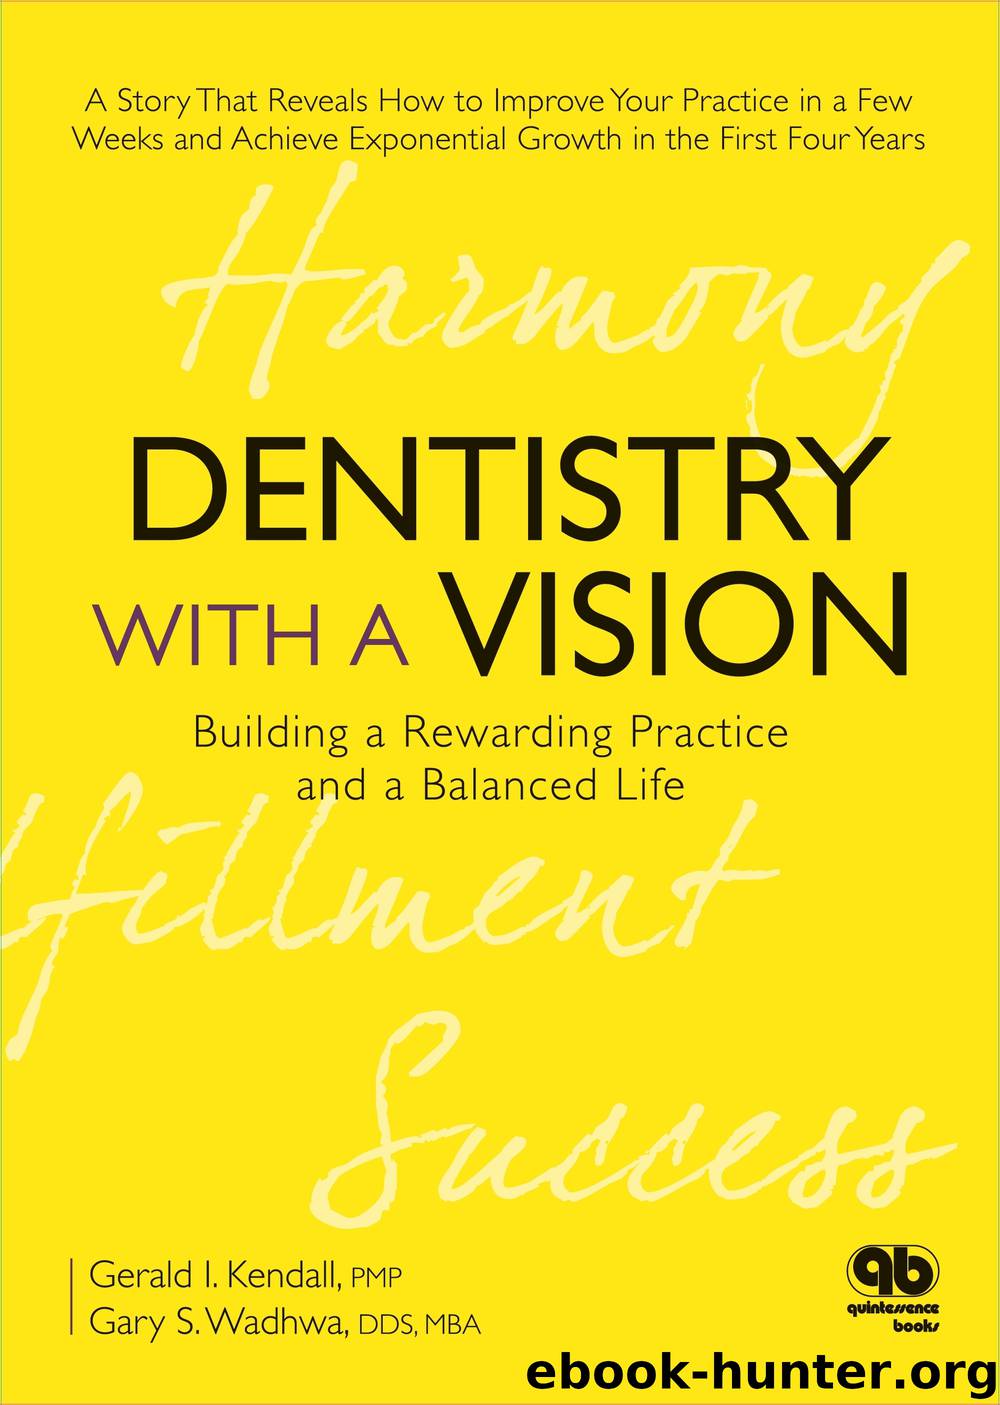 Dentistry with a Vision: Building a Rewarding Practice and a Balanced Life by Gerald I. Kendall Gary S. Wadhwa